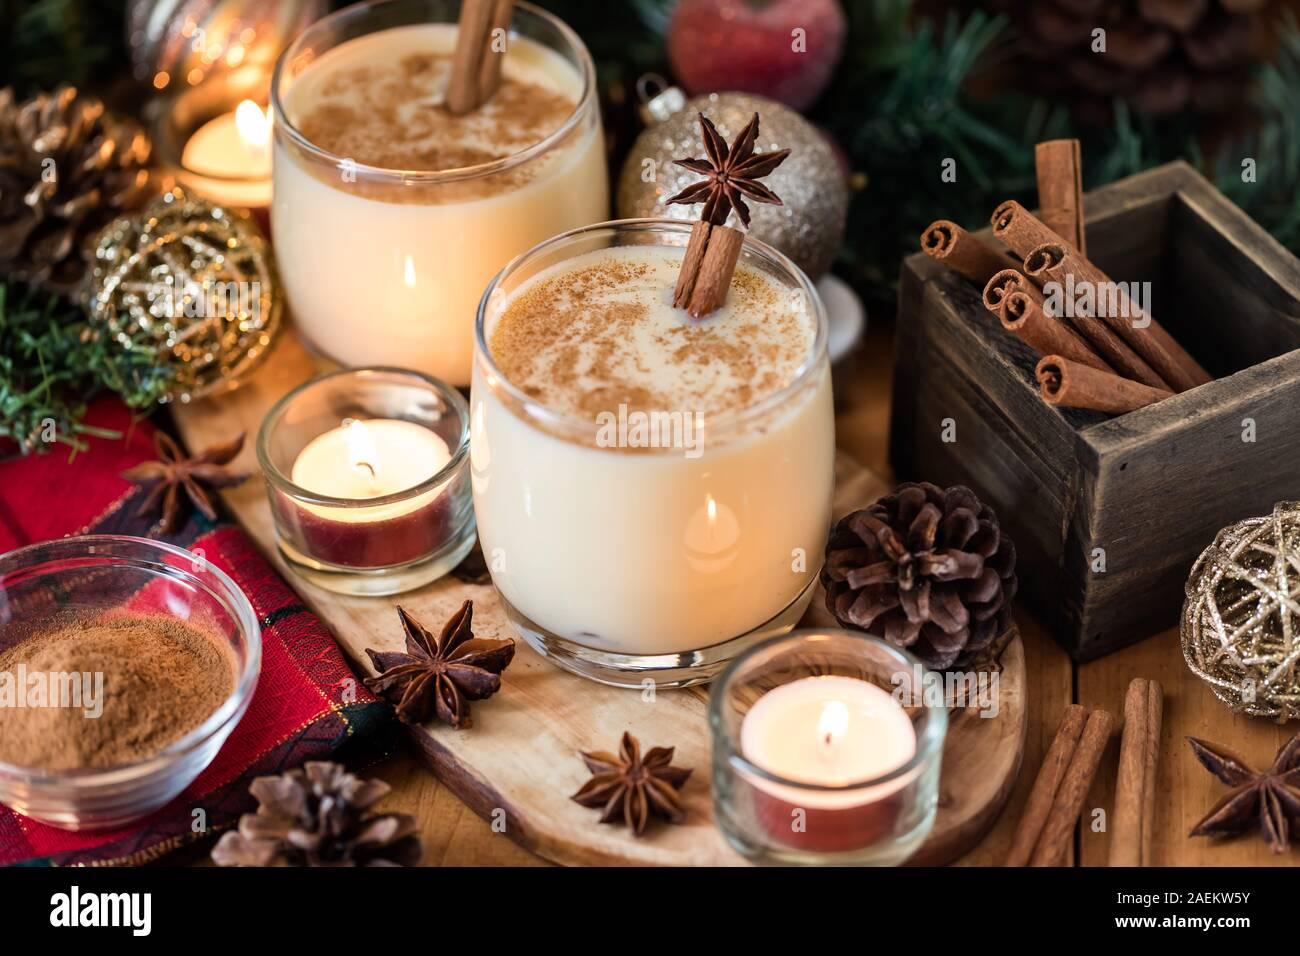 A close up view of two glasses of egg nog with cinnamon and star